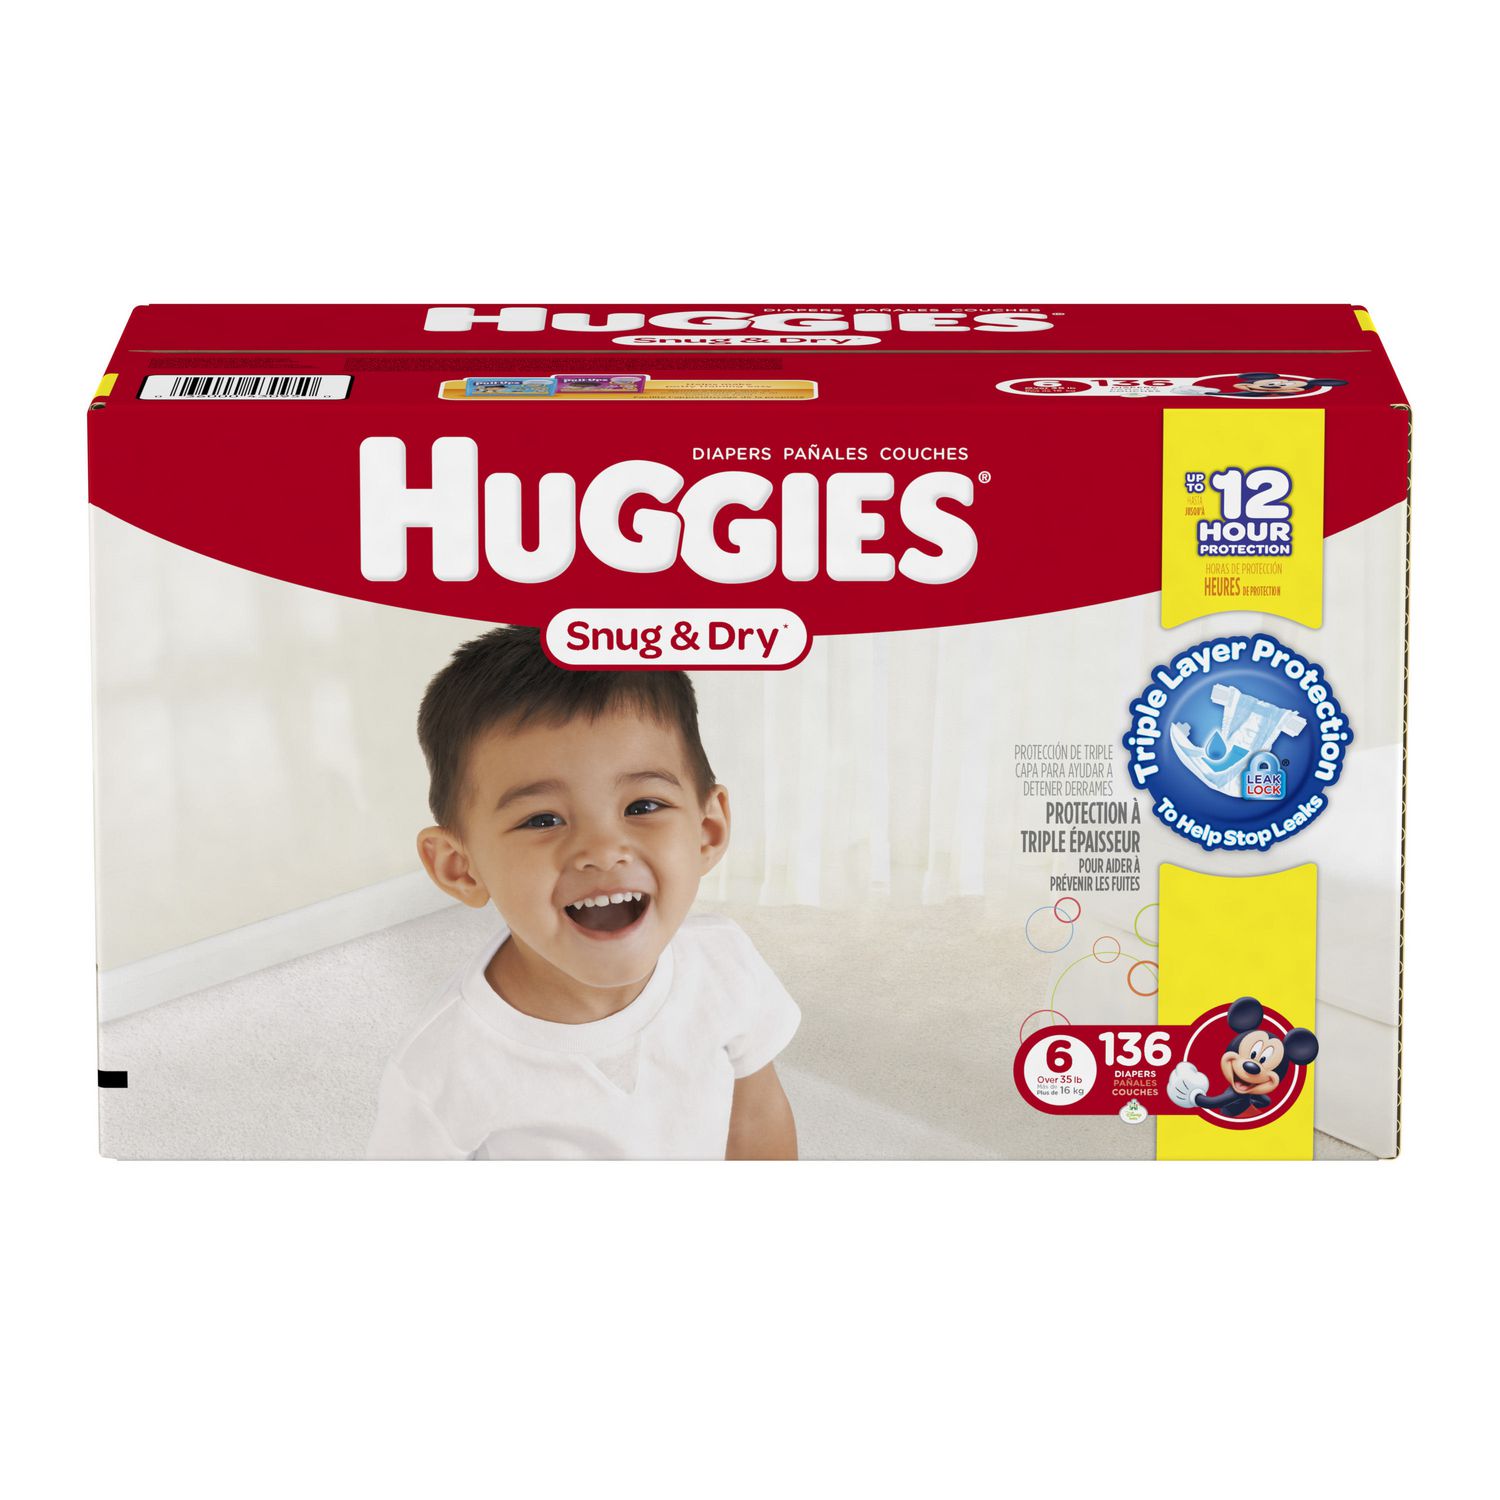 HUGGIES Snug & Dry Diapers 222 Count Size 3 Packaging May Vary 